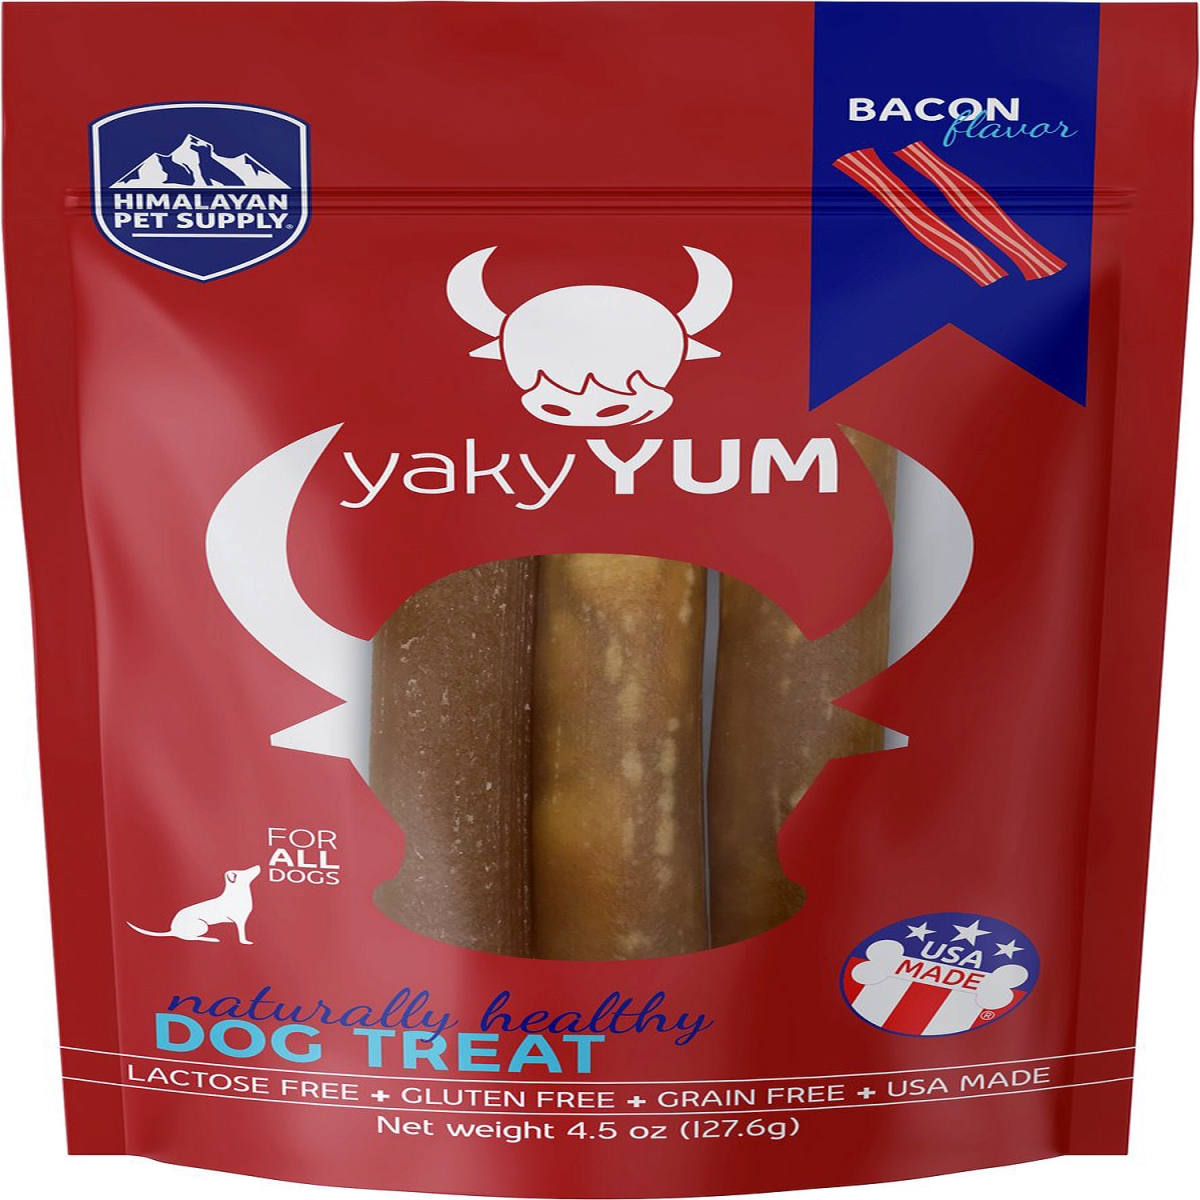 Picture of Himalayan Dog Chew 857164007501 4.5 oz Yaky Yum Bacon Dog Chew